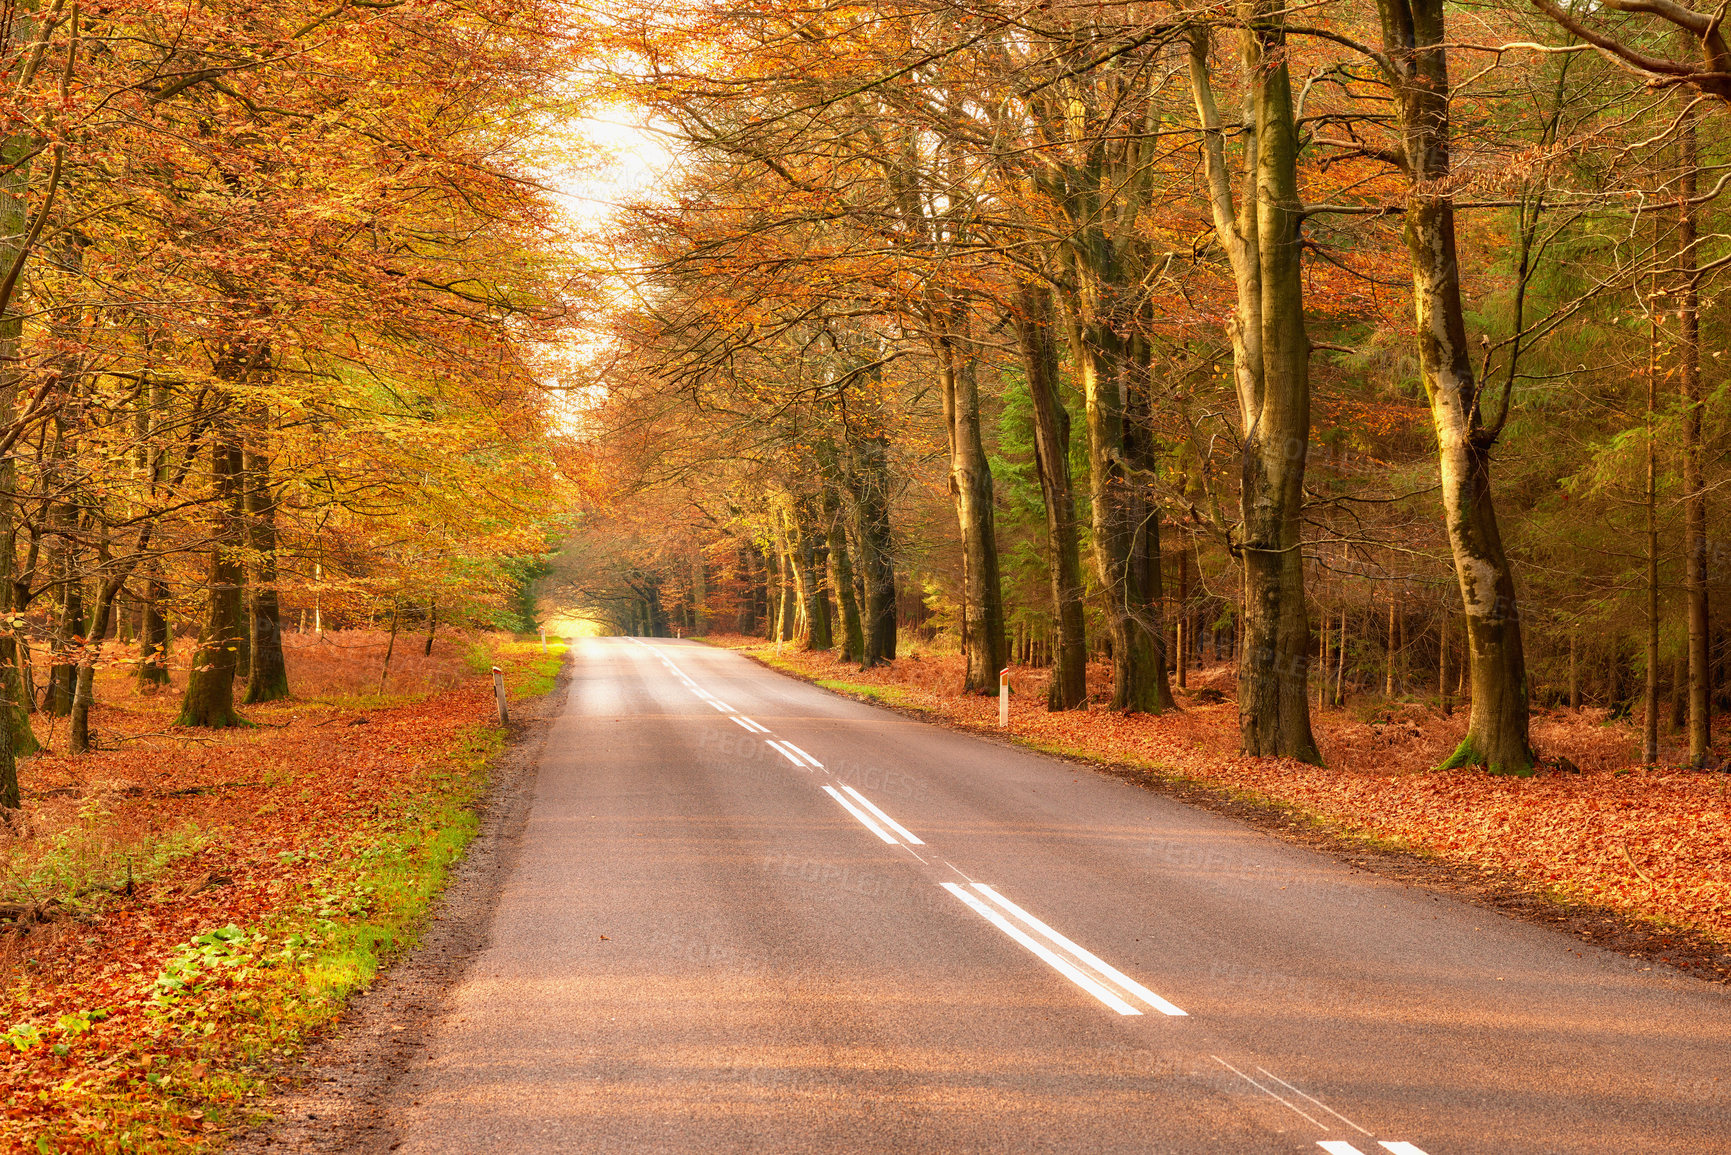 Buy stock photo View of a scenic road and trees in a forest leading to a secluded area during autumn. Woodland surrounding an empty street on the countryside. Deserted forest or woods along a quiet highway in fall